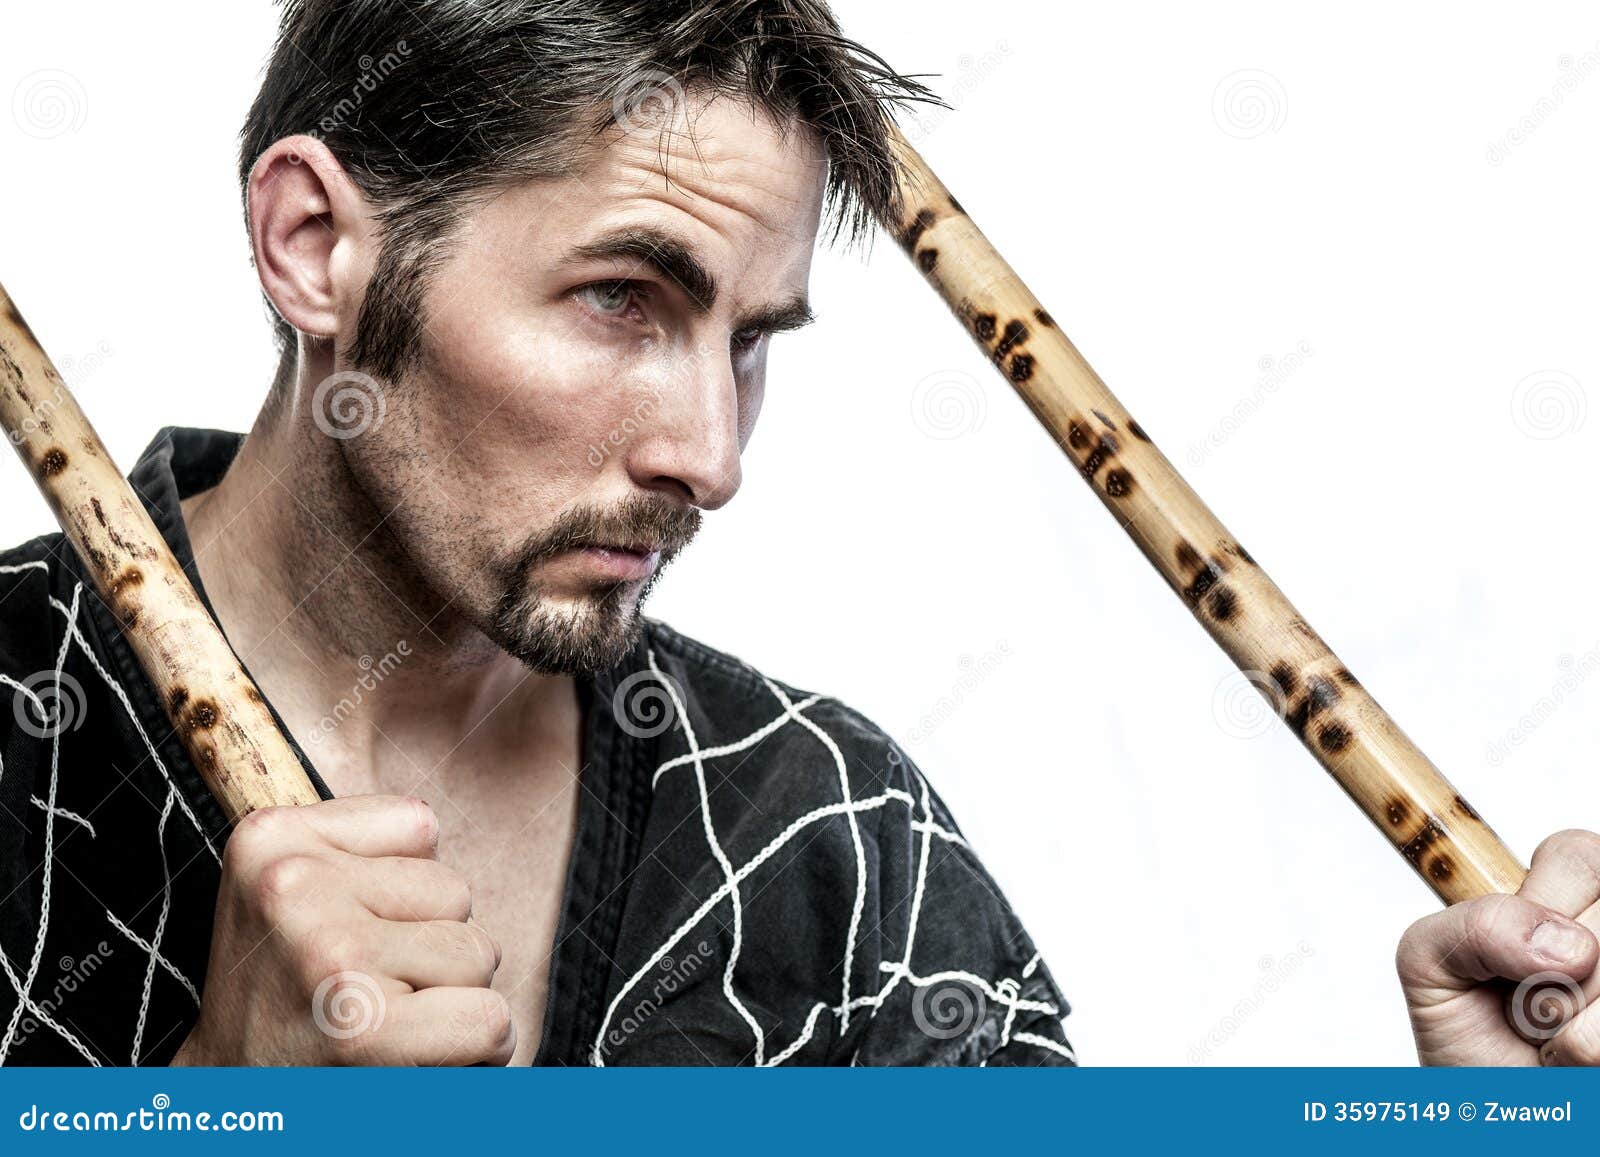 Martial arts master with bamboo sticks - martial-arts-master-bamboo-sticks-black-combat-dress-two-short-isolated-white-background-35975149